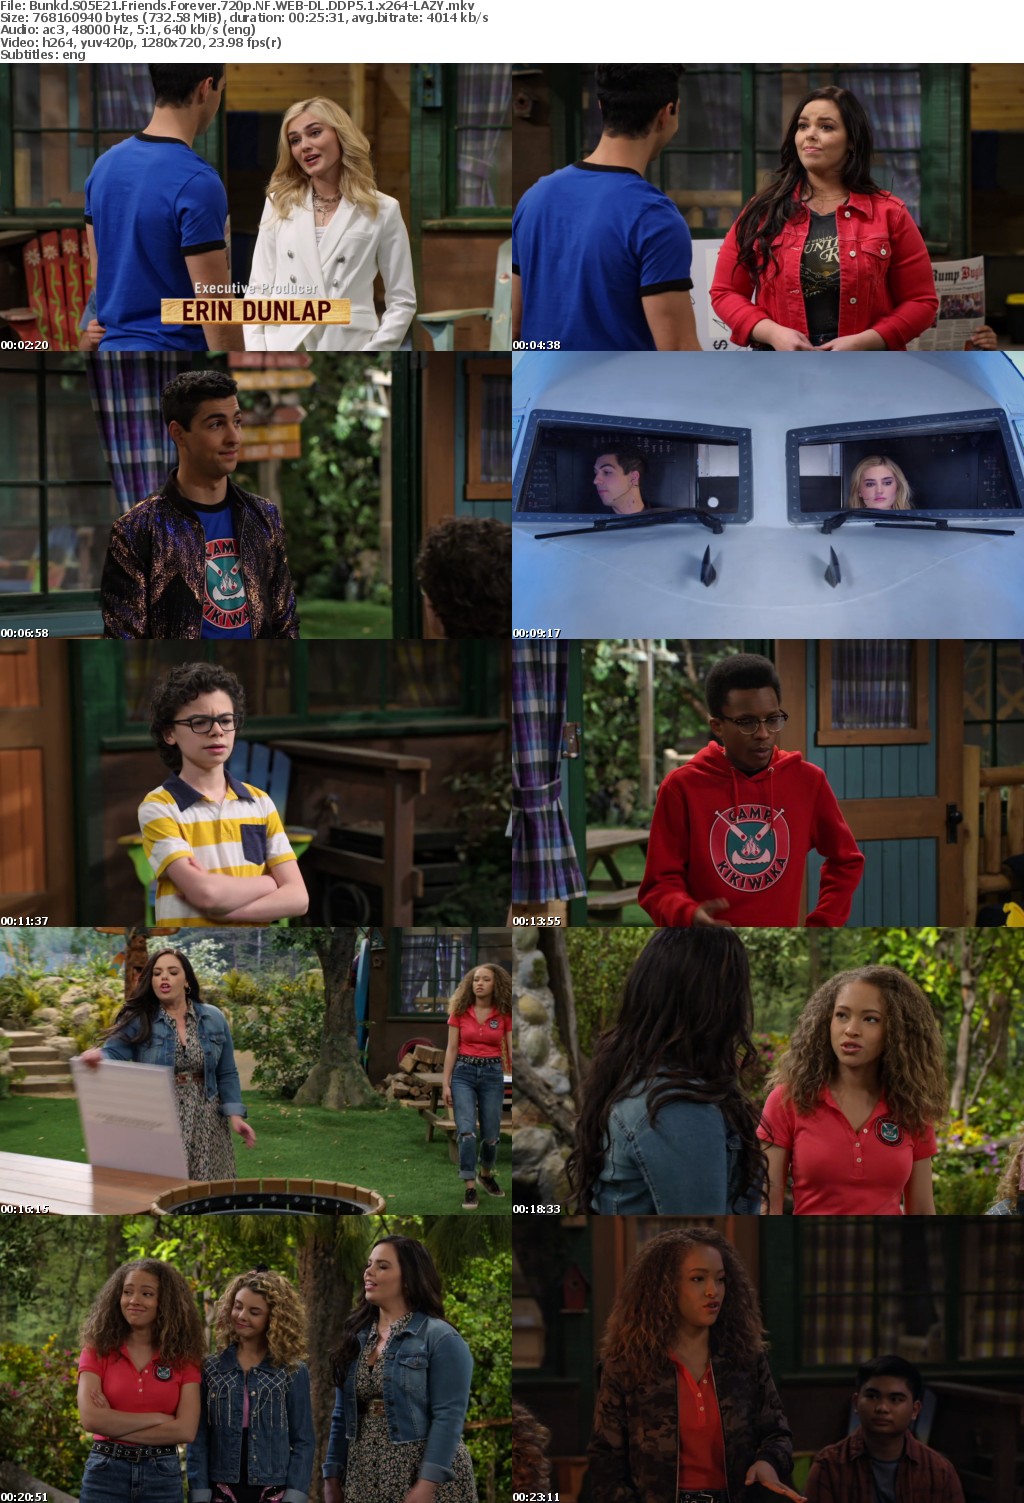 Bunkd S05E21 Friends Forever 720p NF WEBRip DDP5 1 x264-LAZY